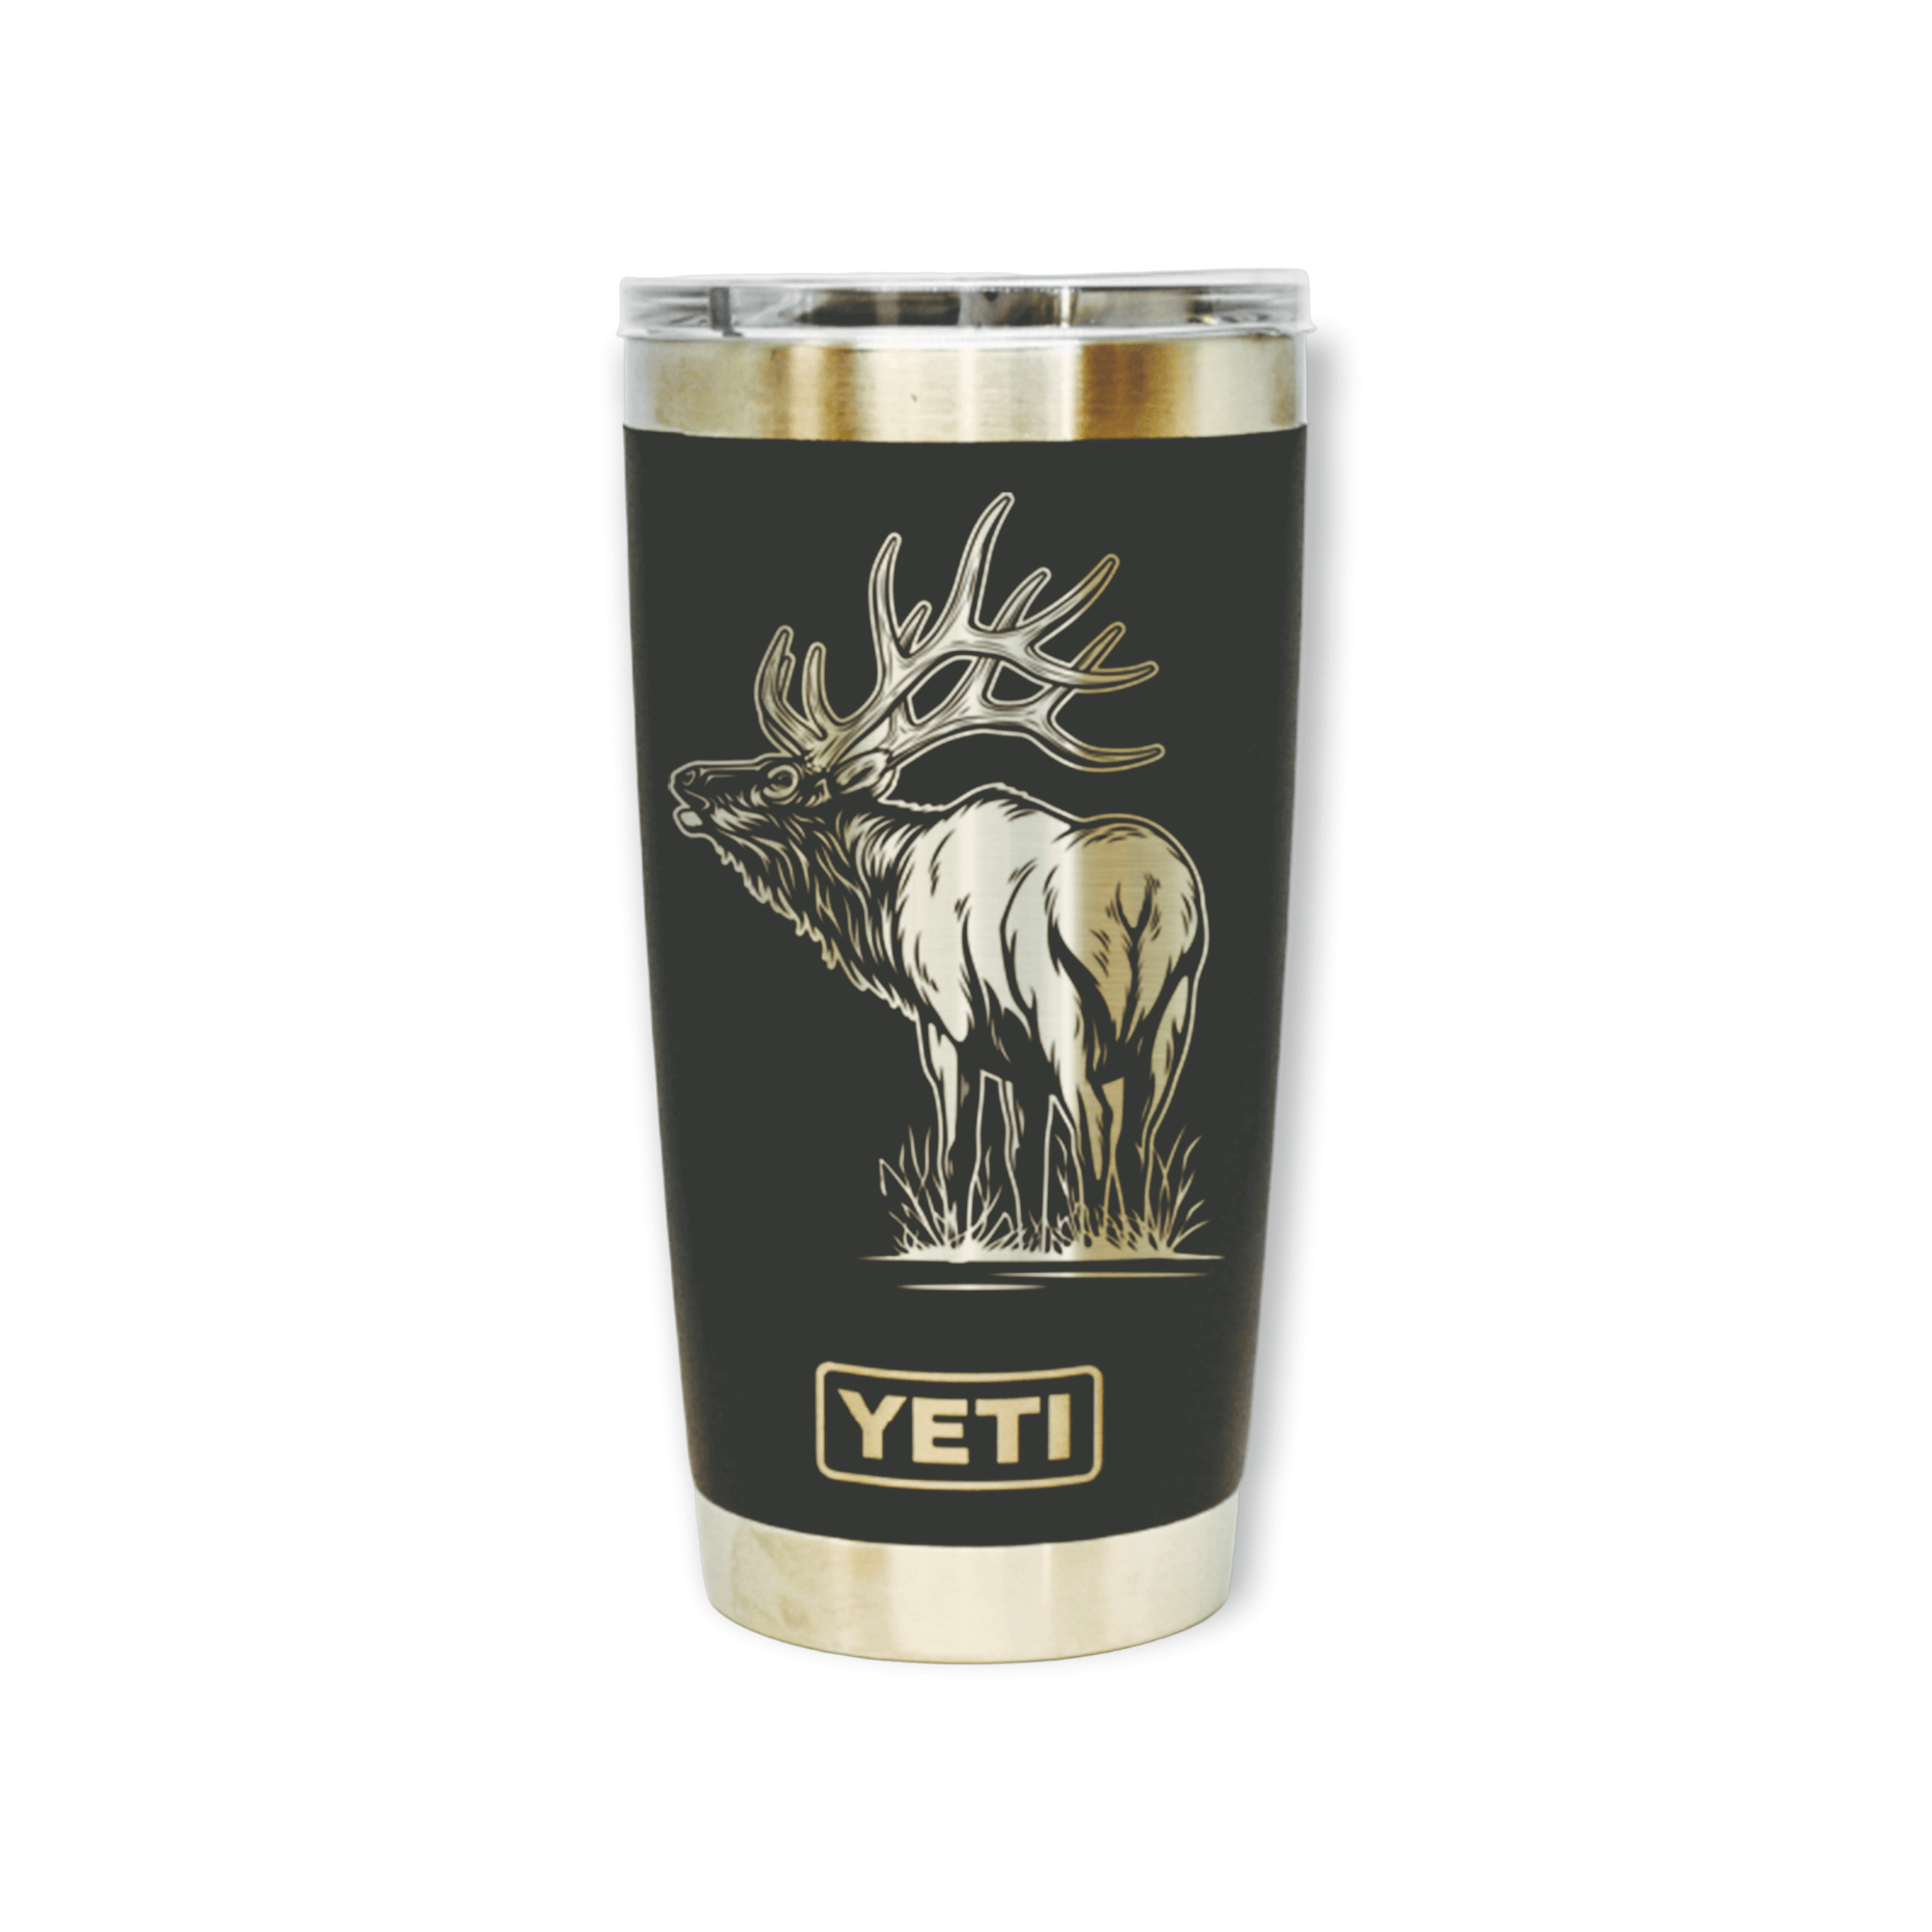 https://cdn.shopify.com/s/files/1/0606/5497/7184/products/wind-river_outpost_elk-yeti_2000x.png?v=1678141216